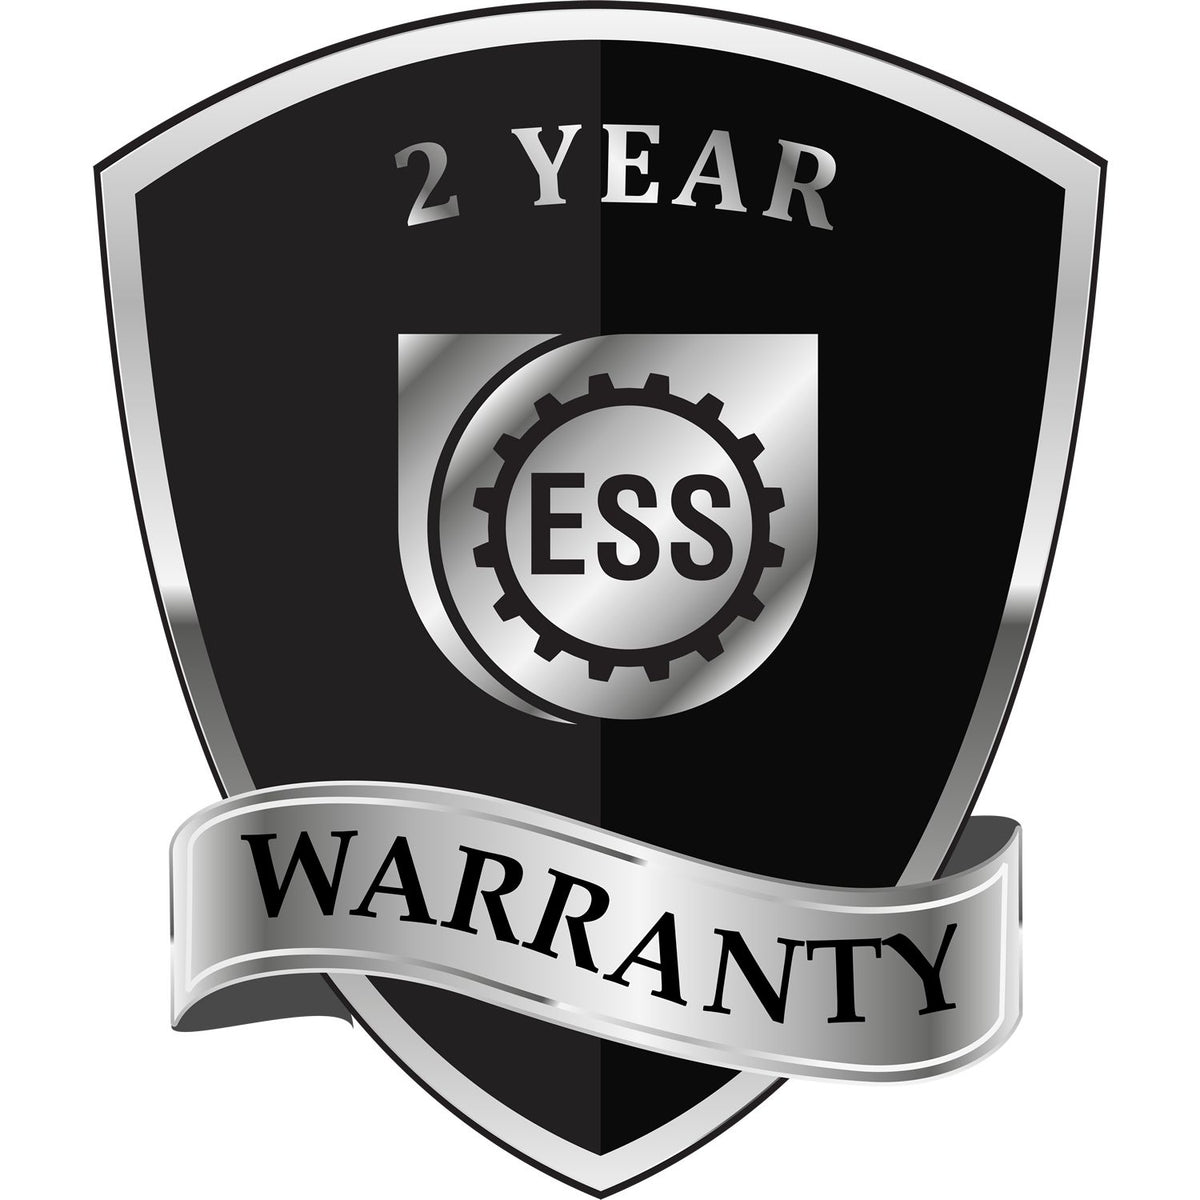 A badge or emblem showing a warranty icon for the Long Reach Idaho Land Surveyor Seal